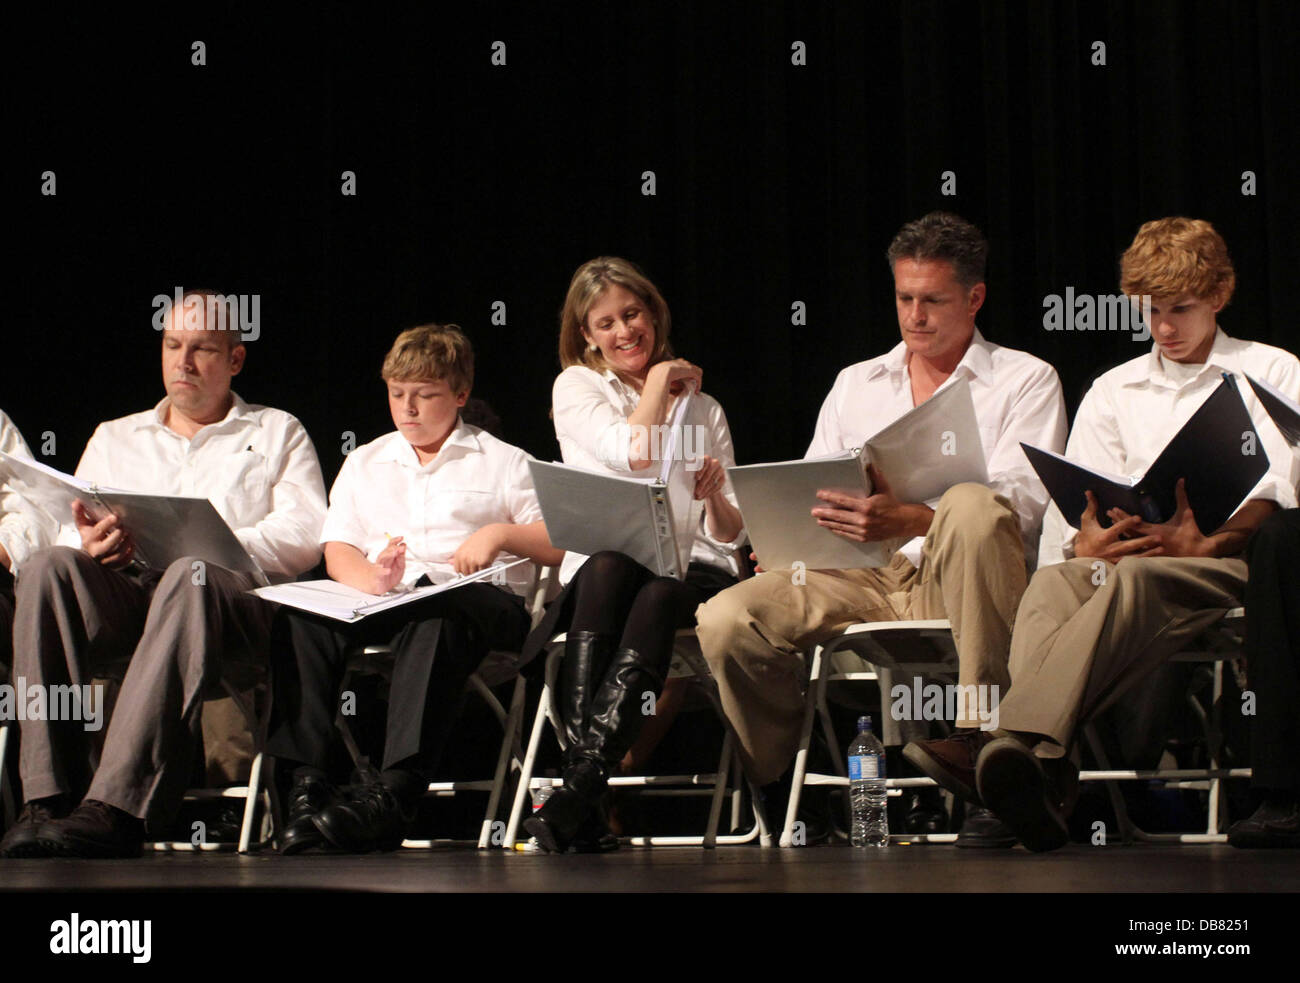 Robert Watzke, Zane Amundsen, Helen Slater, David Humphrey and Tyler Voss 'The Road To Freedom' live audience stage reading at The LACC Camino Theatre Los Angeles, California - 15.05.11 Stock Photo